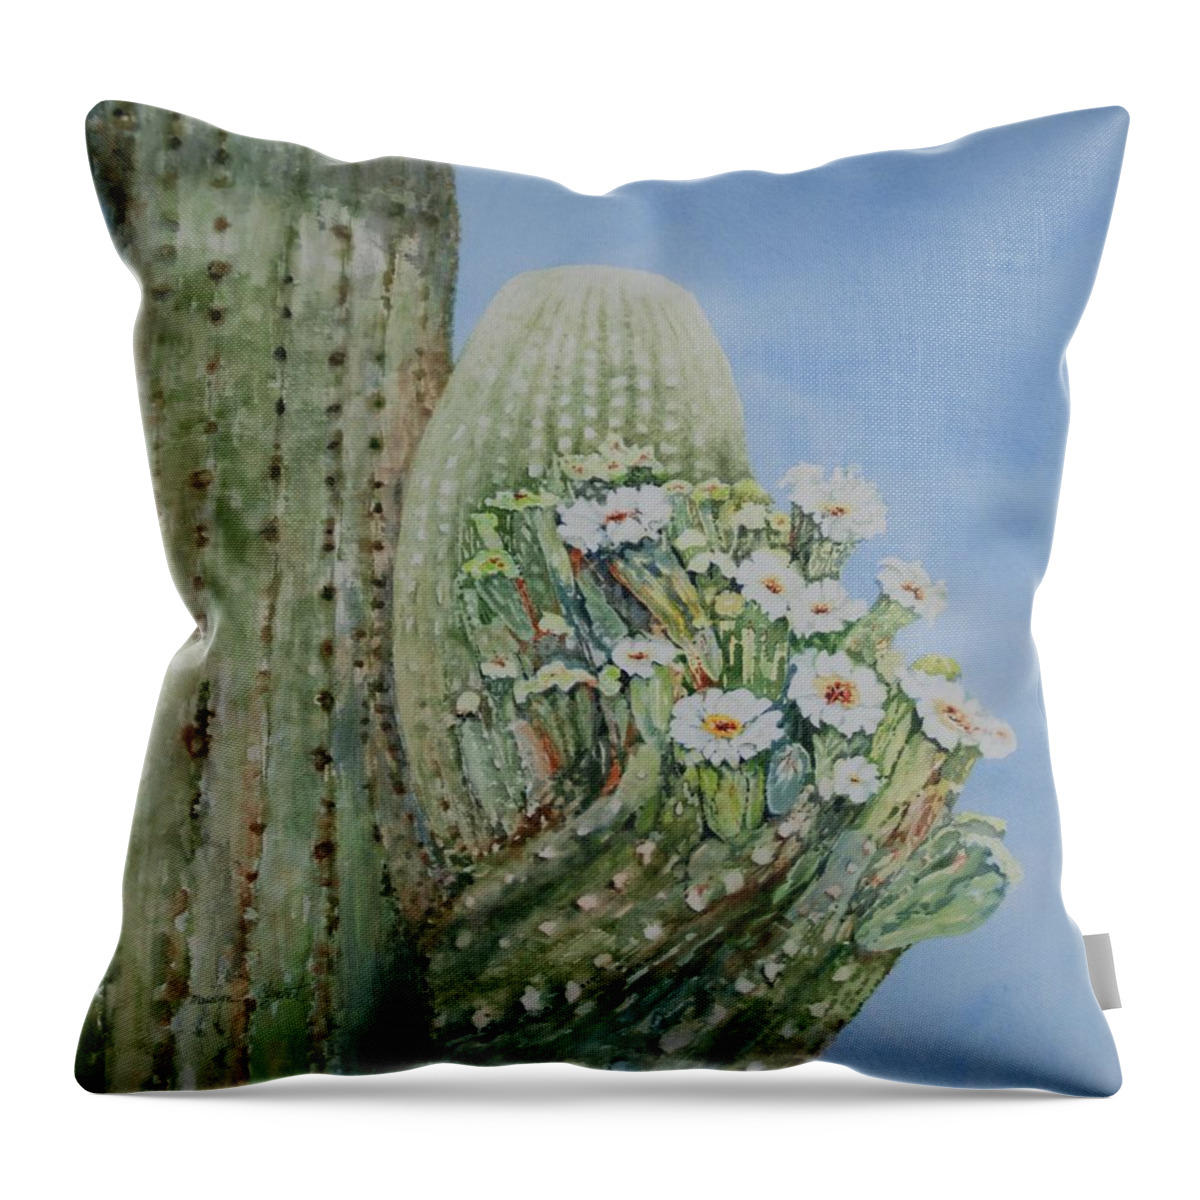 Cactus Throw Pillow featuring the painting Saguaro Cactus in Bloom by Marilyn Clement